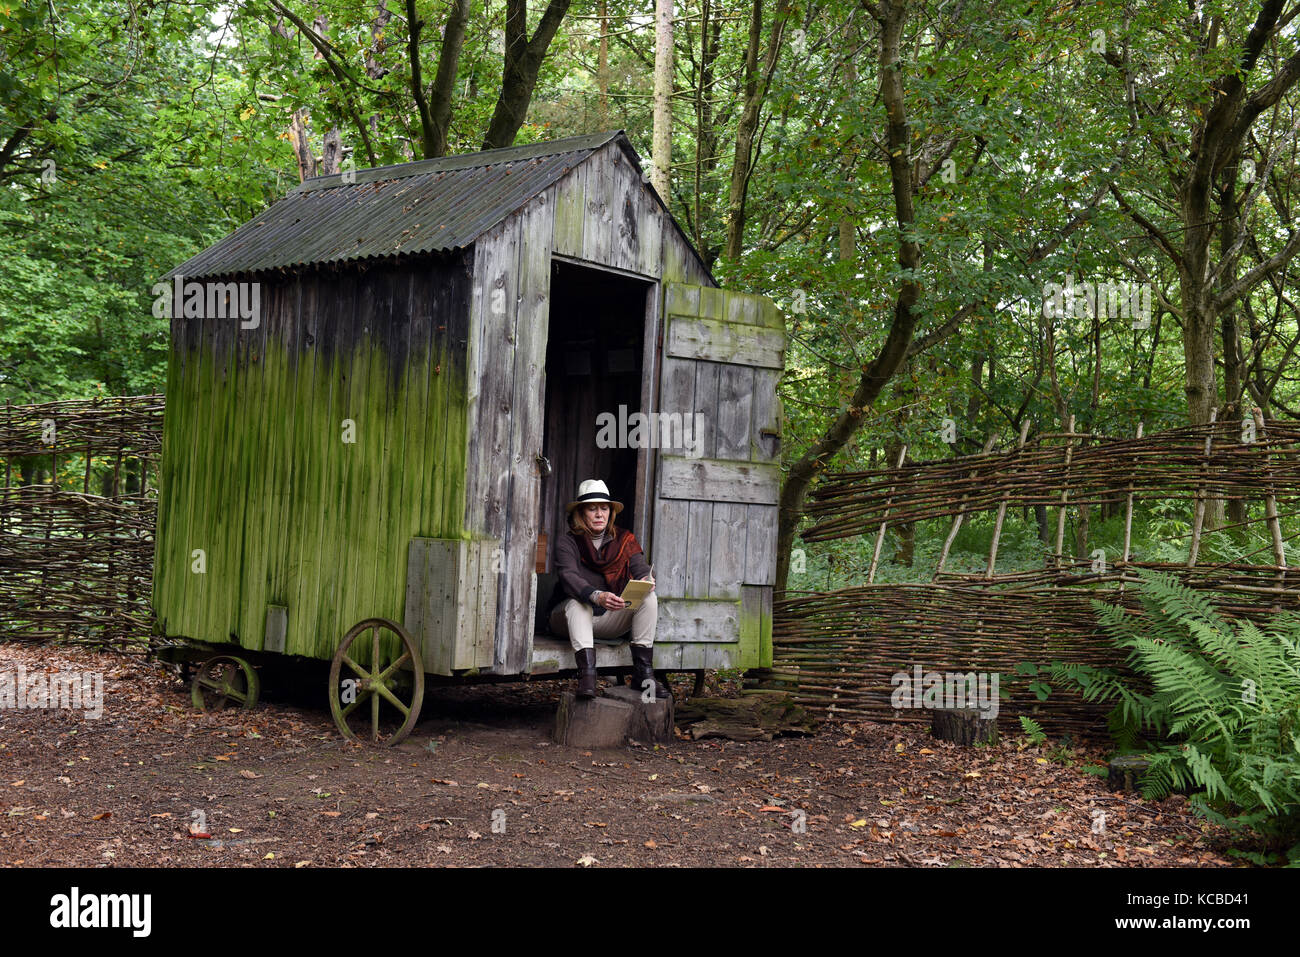 Woman relaxing with book on woodland garden shed on wheels Britain Uk secluded seclusion isolation hideaway rural retreat Stock Photo